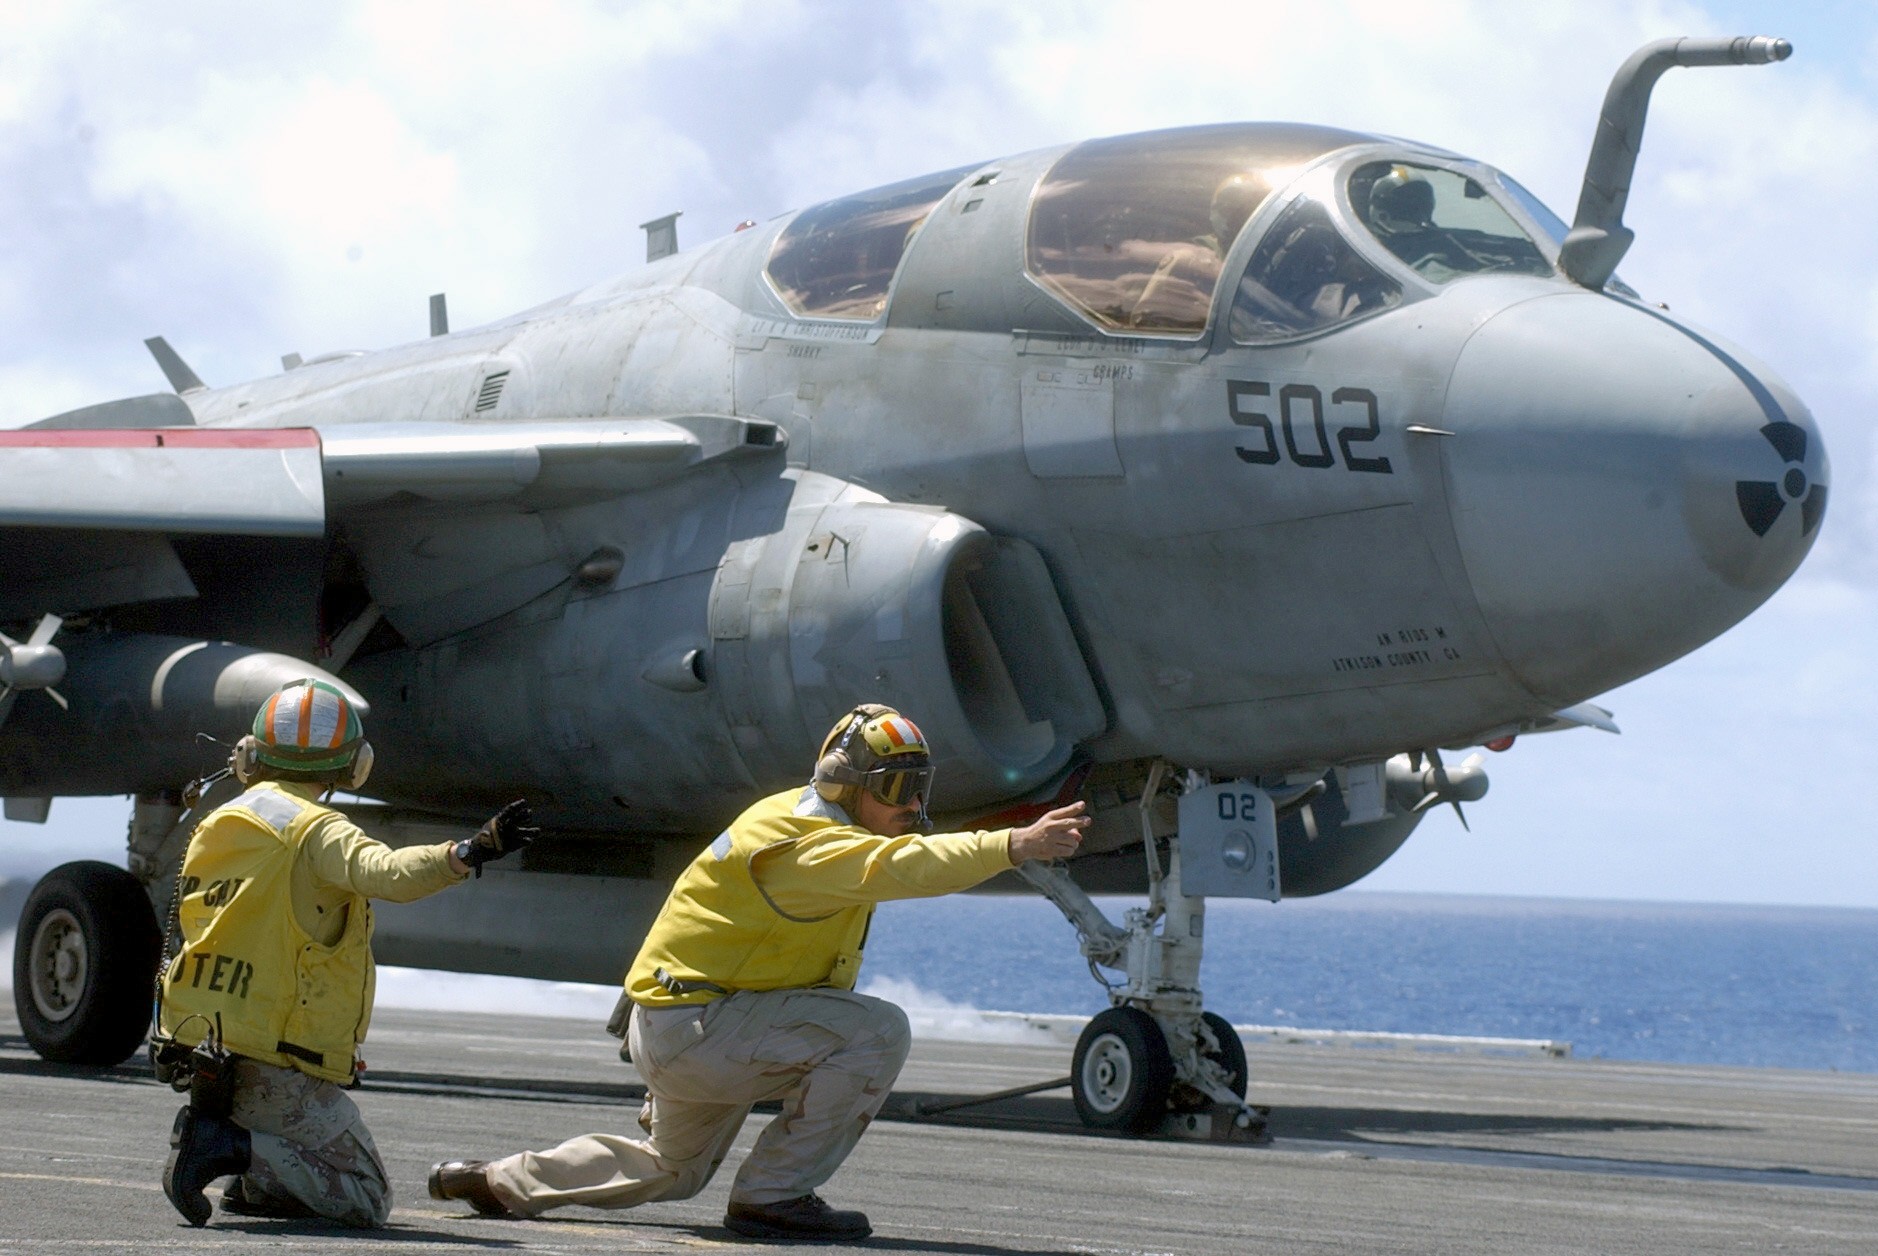 vaq-136 gauntlets electronic attack squadron vaqron us navy ea-6b prowler carrier air wing cvw-5 uss kitty hawk cv-63 43